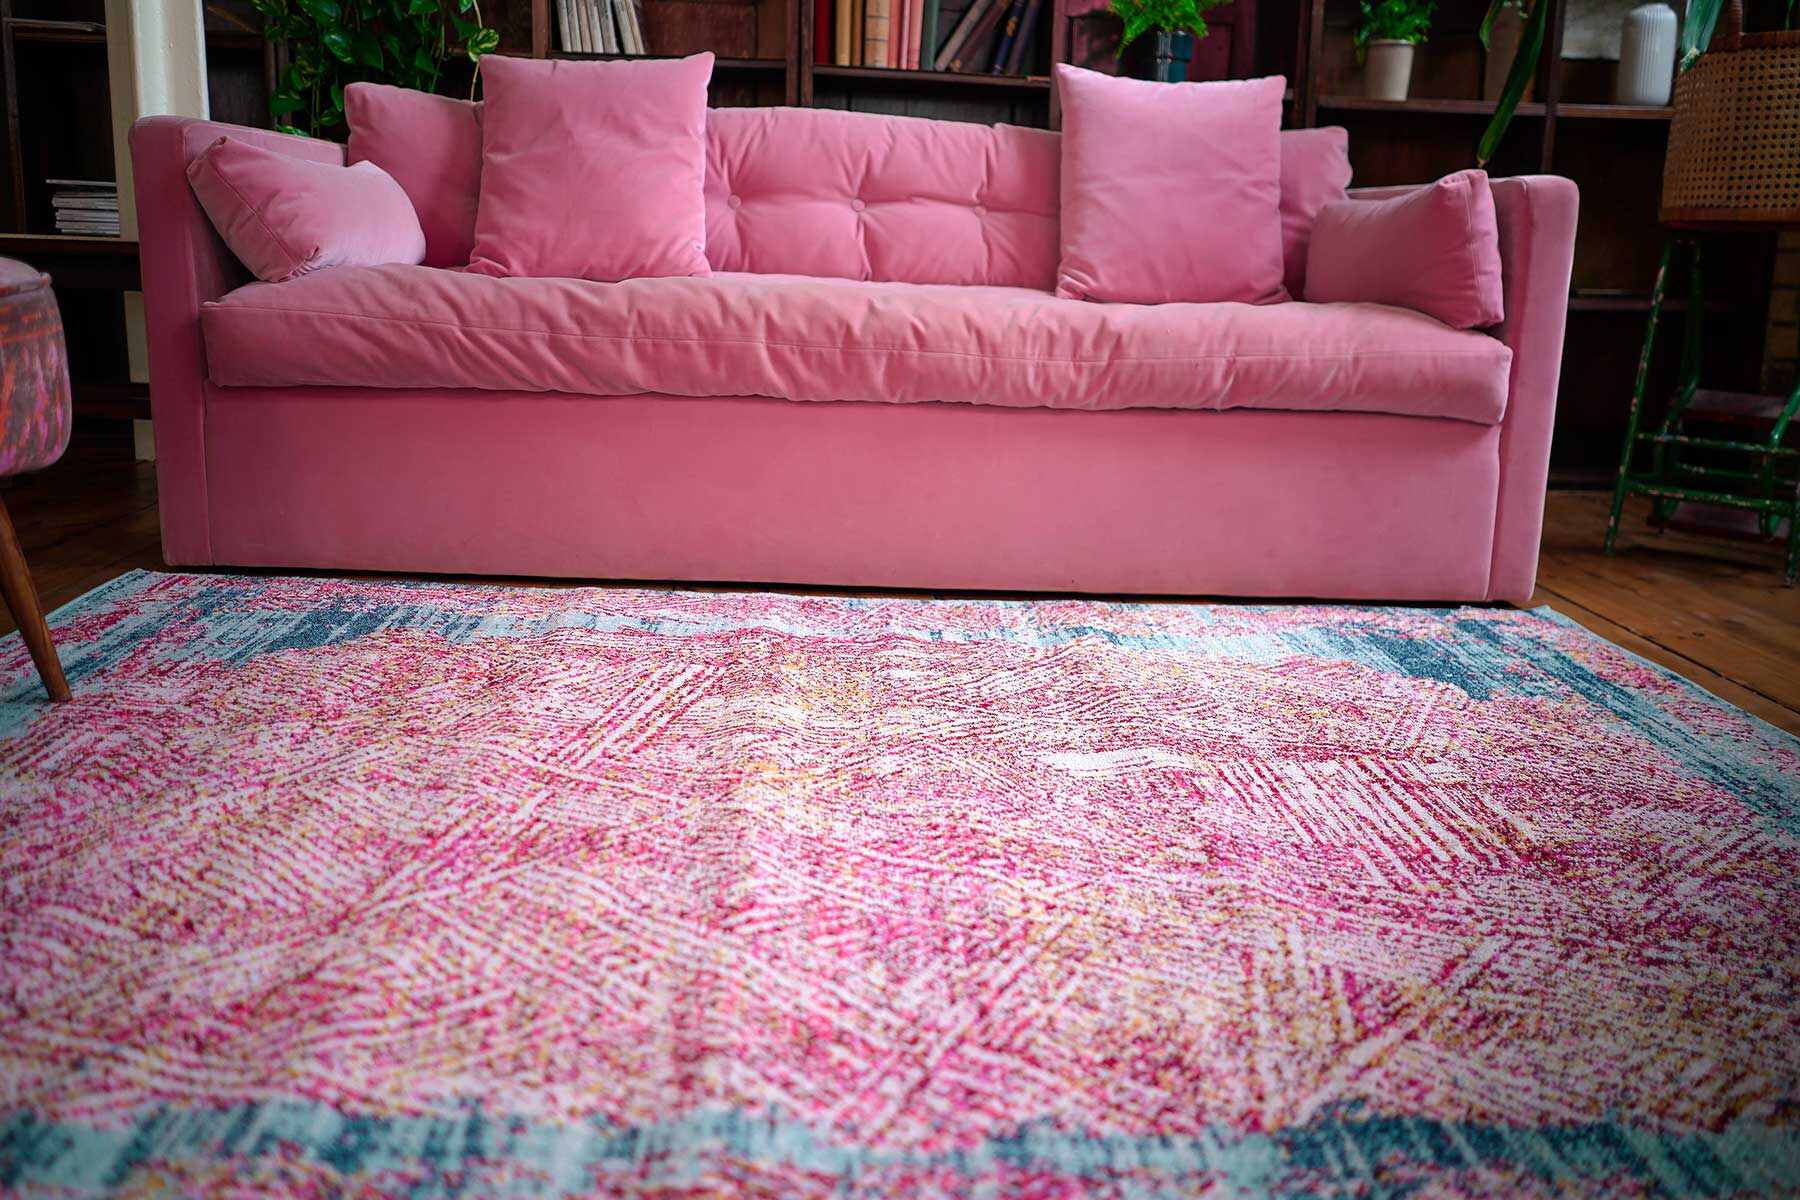 How to Maintain and Clean Your Bedroom Rug